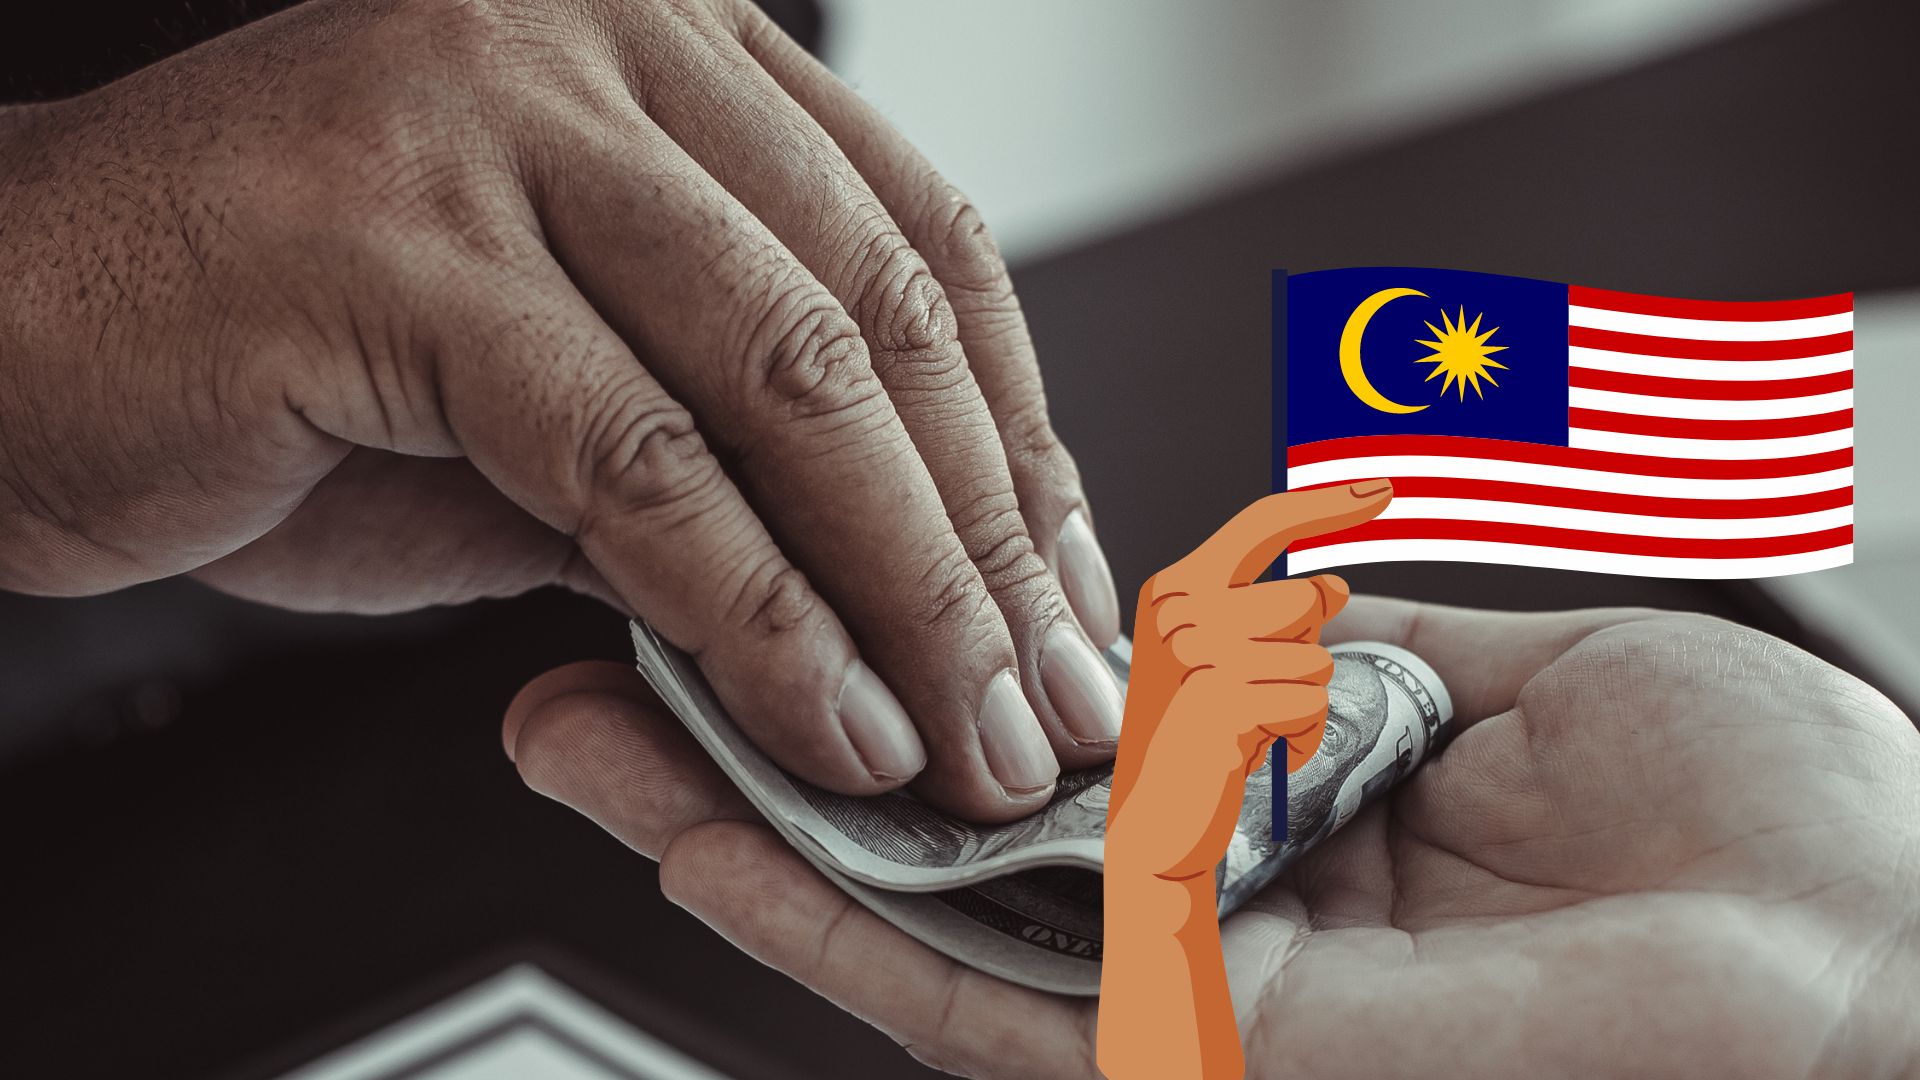 The high number of corrupt behaviours in Malaysia has led to the call for some changes in laws and educational approaches in relation to corruption. 